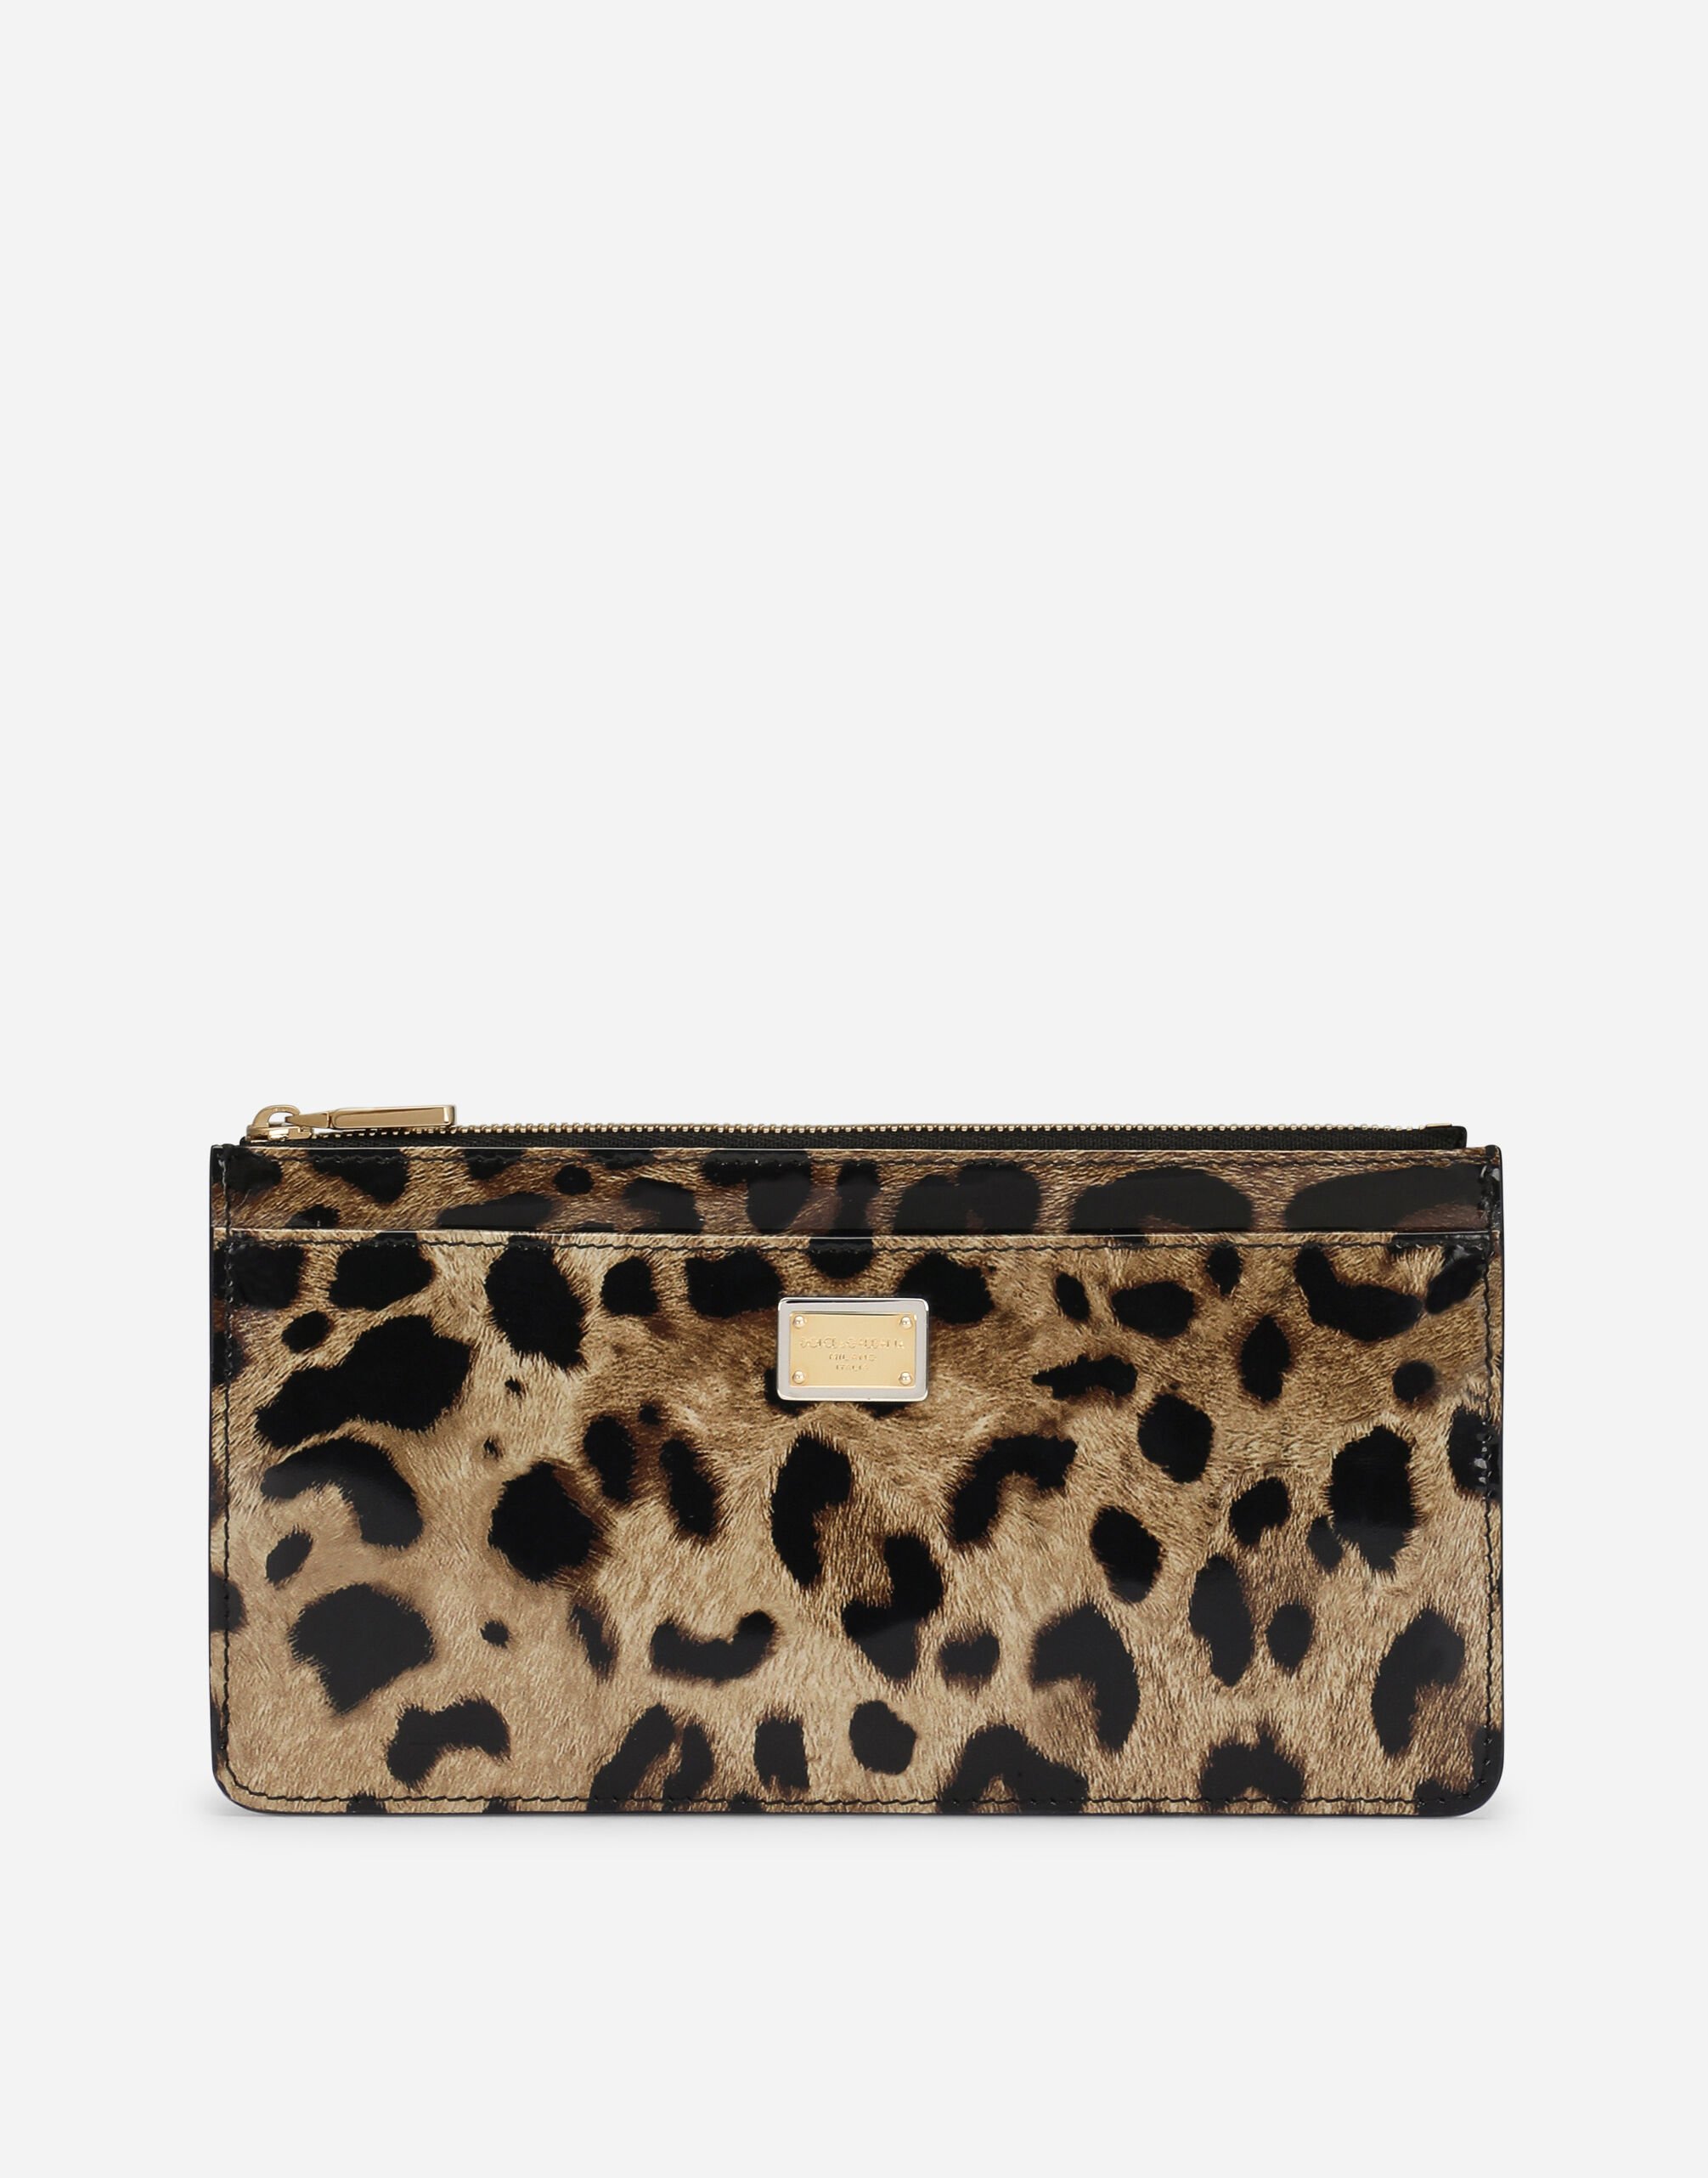 Dolce & Gabbana Large polished calfskin card holder with zipper and leopard print Gold WRQA1GWQC01